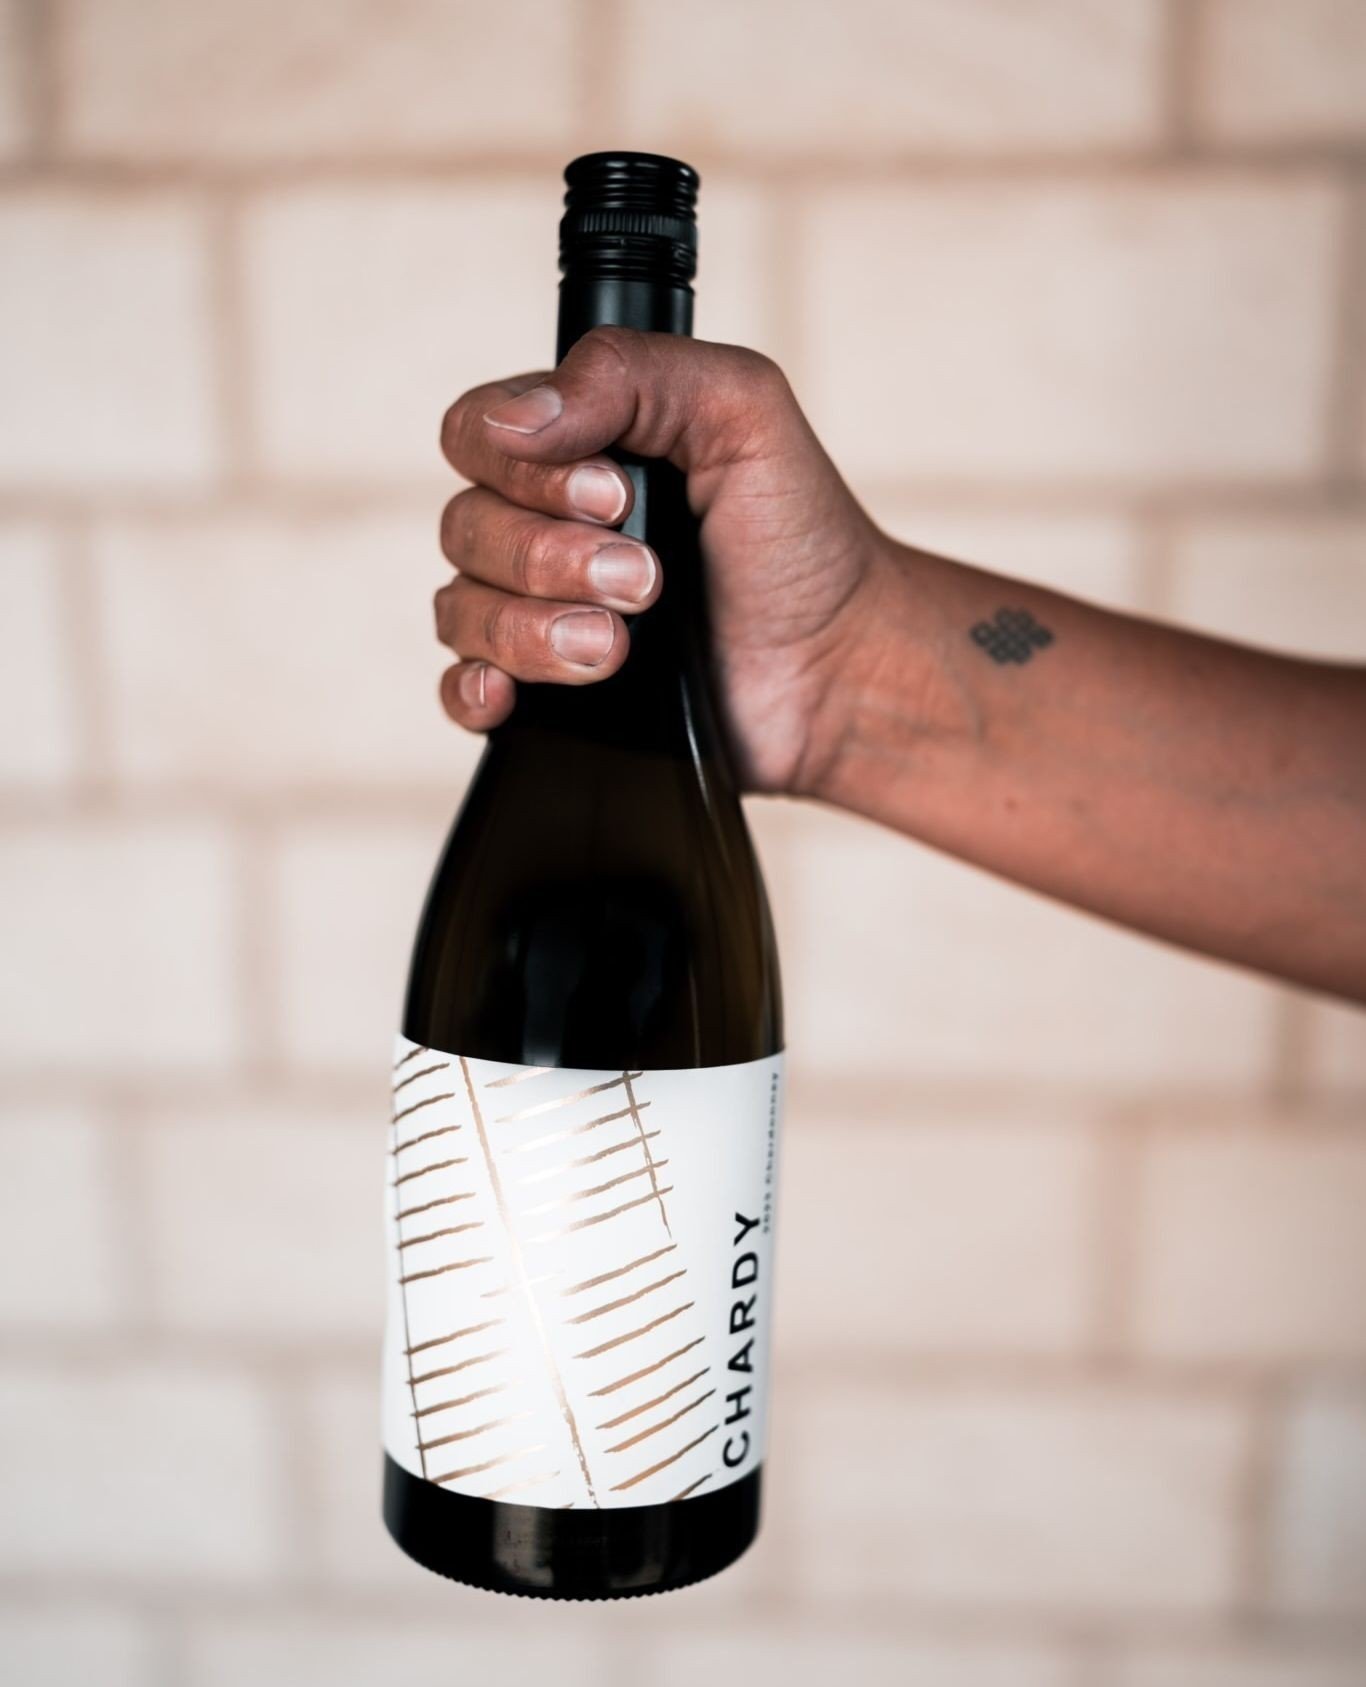 ✨ NEW DROP ✨⁠
⁠
Introducing &quot;Chardy&quot; - the newest member to join the Green Door lineup. Super approachable for those who may not be fully on the Chardonnay train yet but are working on it! She'll be the one you reach for on a Wednesday even